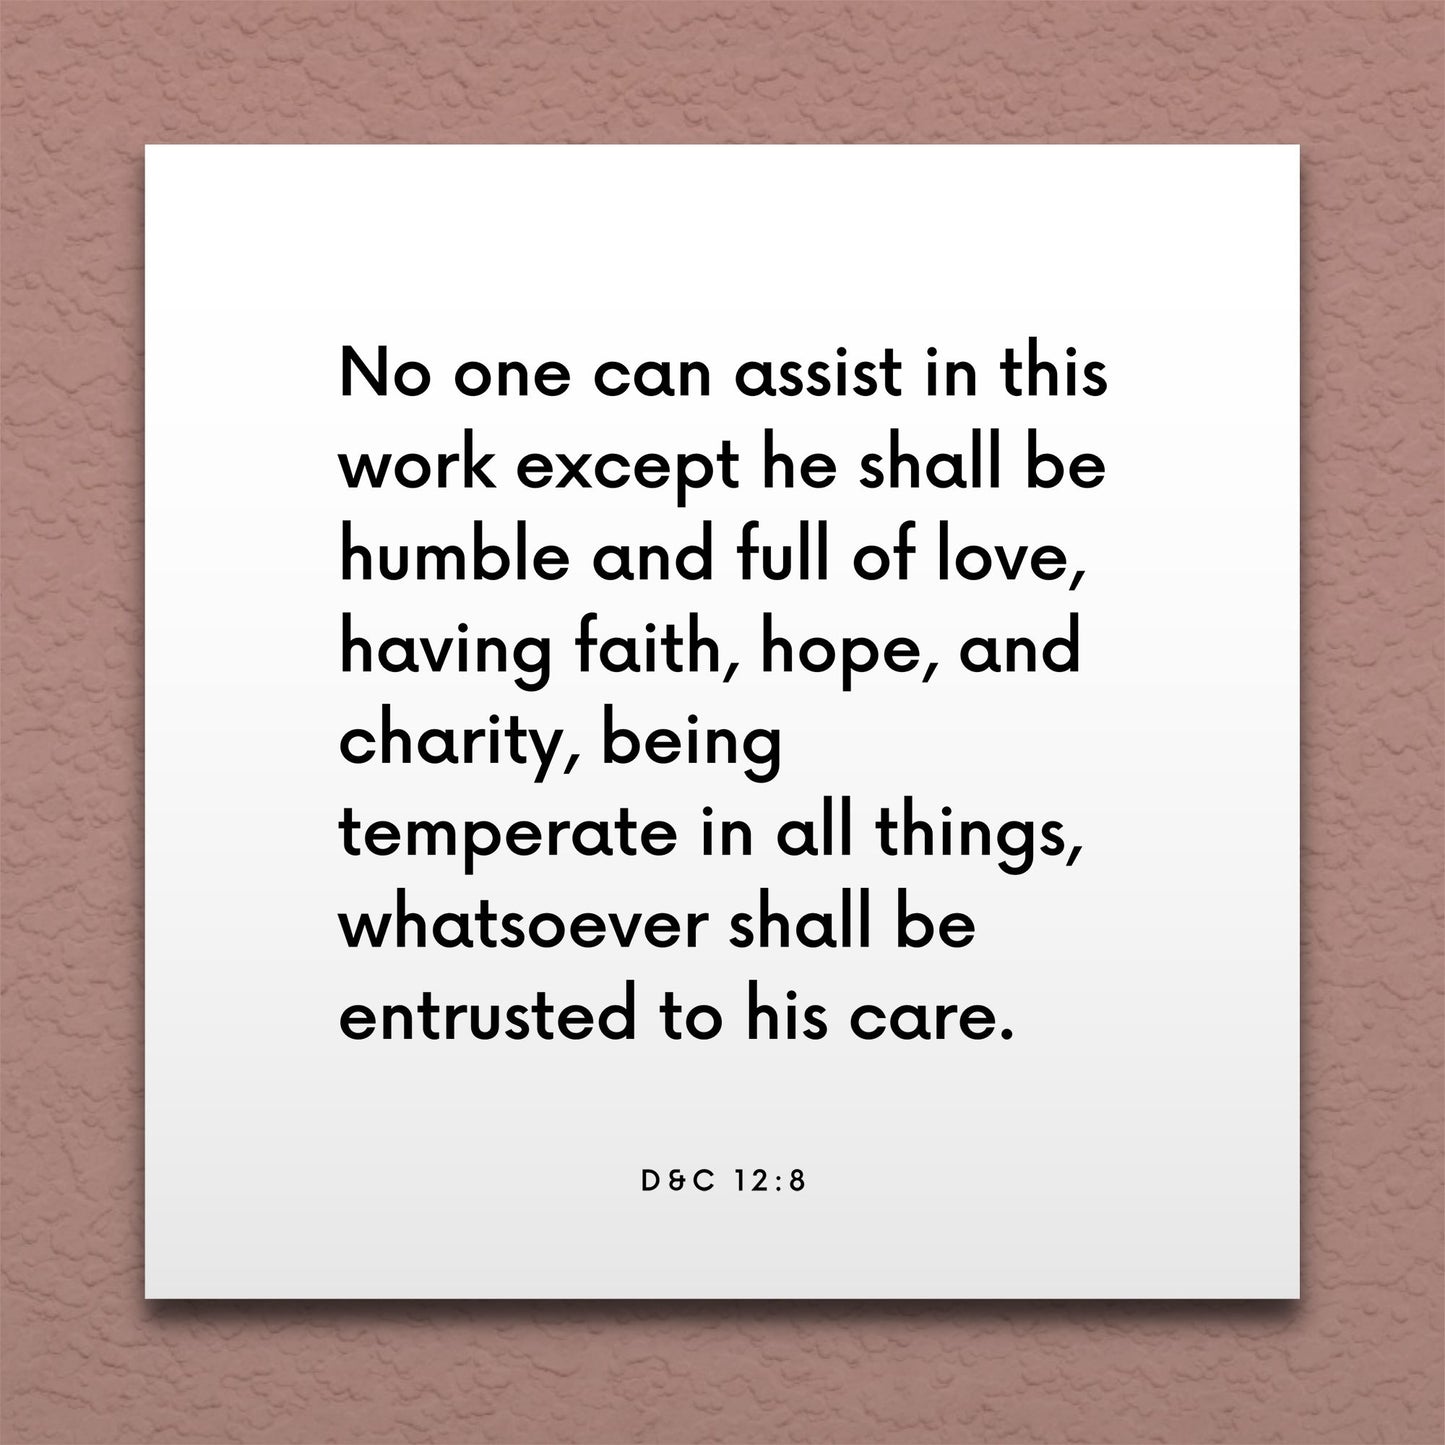 Wall-mounted scripture tile for D&C 12:8 - "No one can assist in this work except he shall be humble"